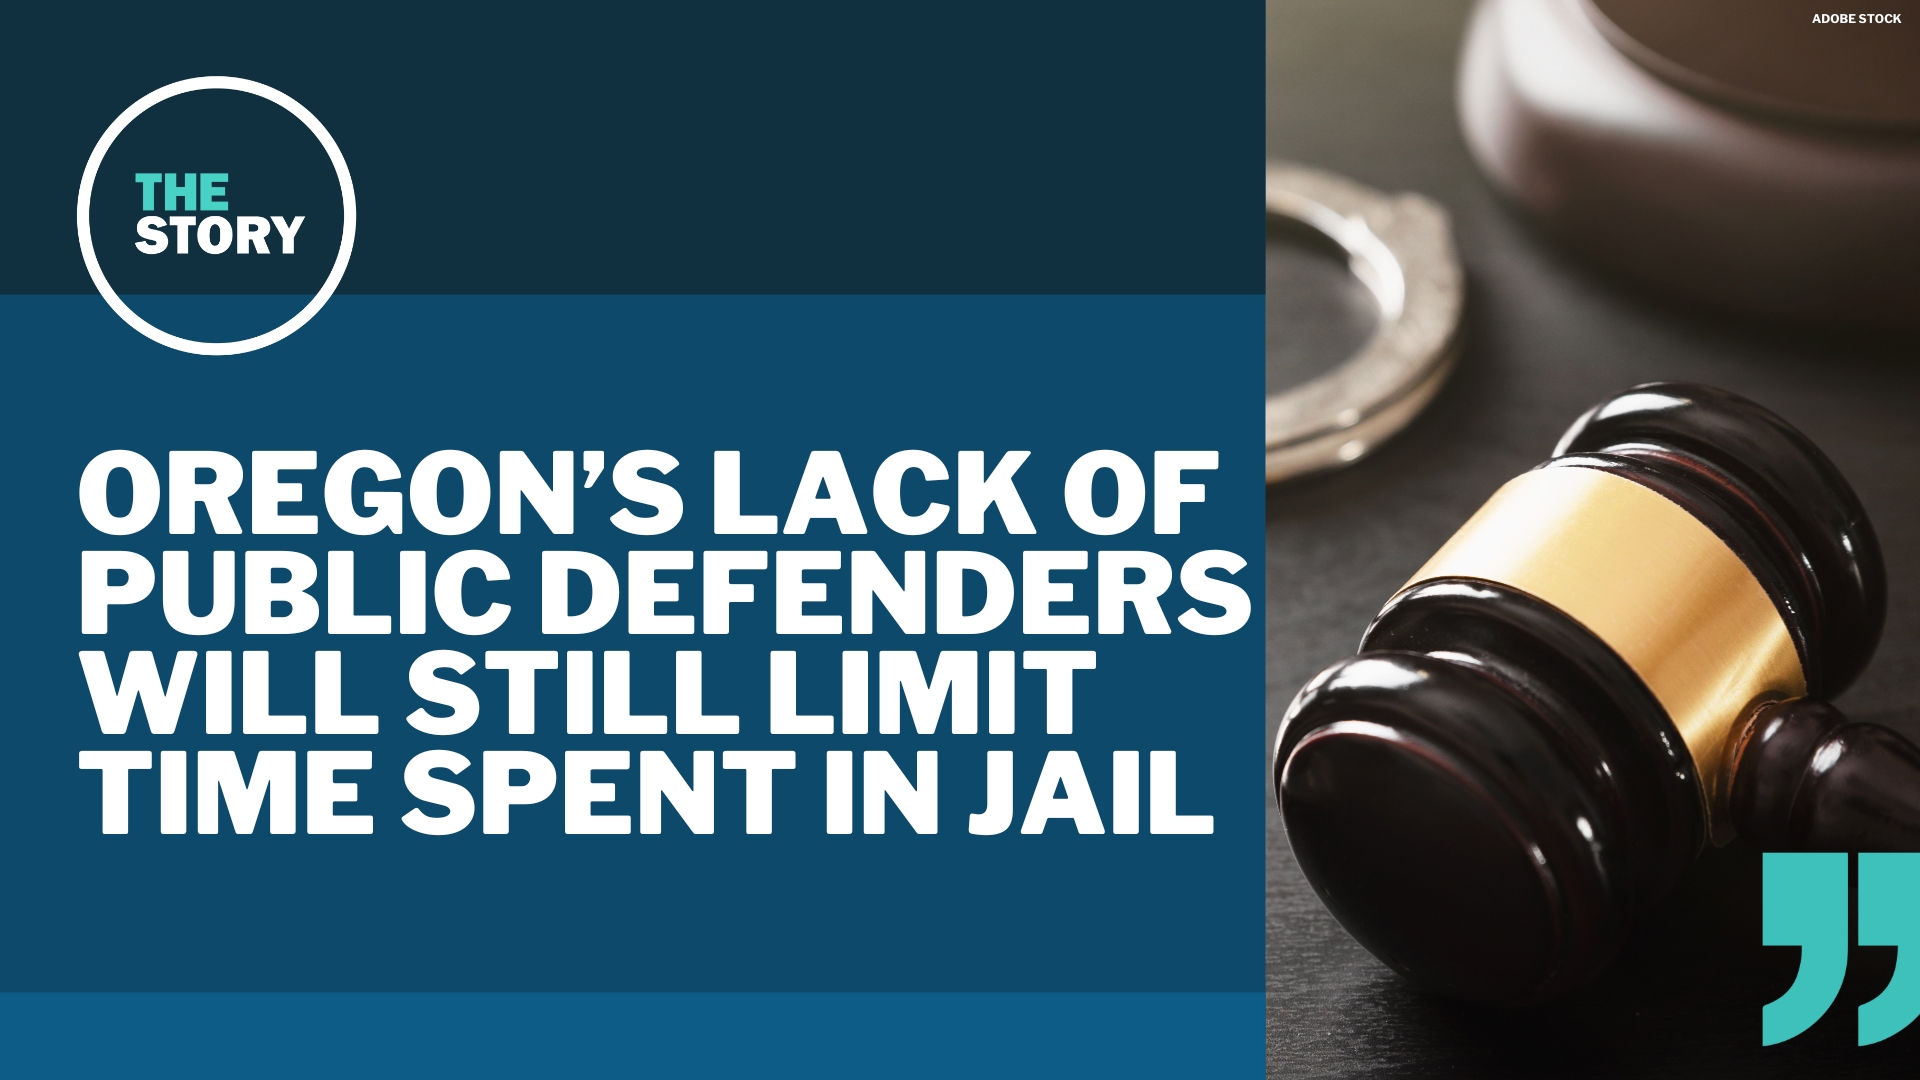 Right now, Oregon has such a shortage of public defenders that defendants could sit in jail for weeks or months awaiting an attorney. This ruling precludes that.